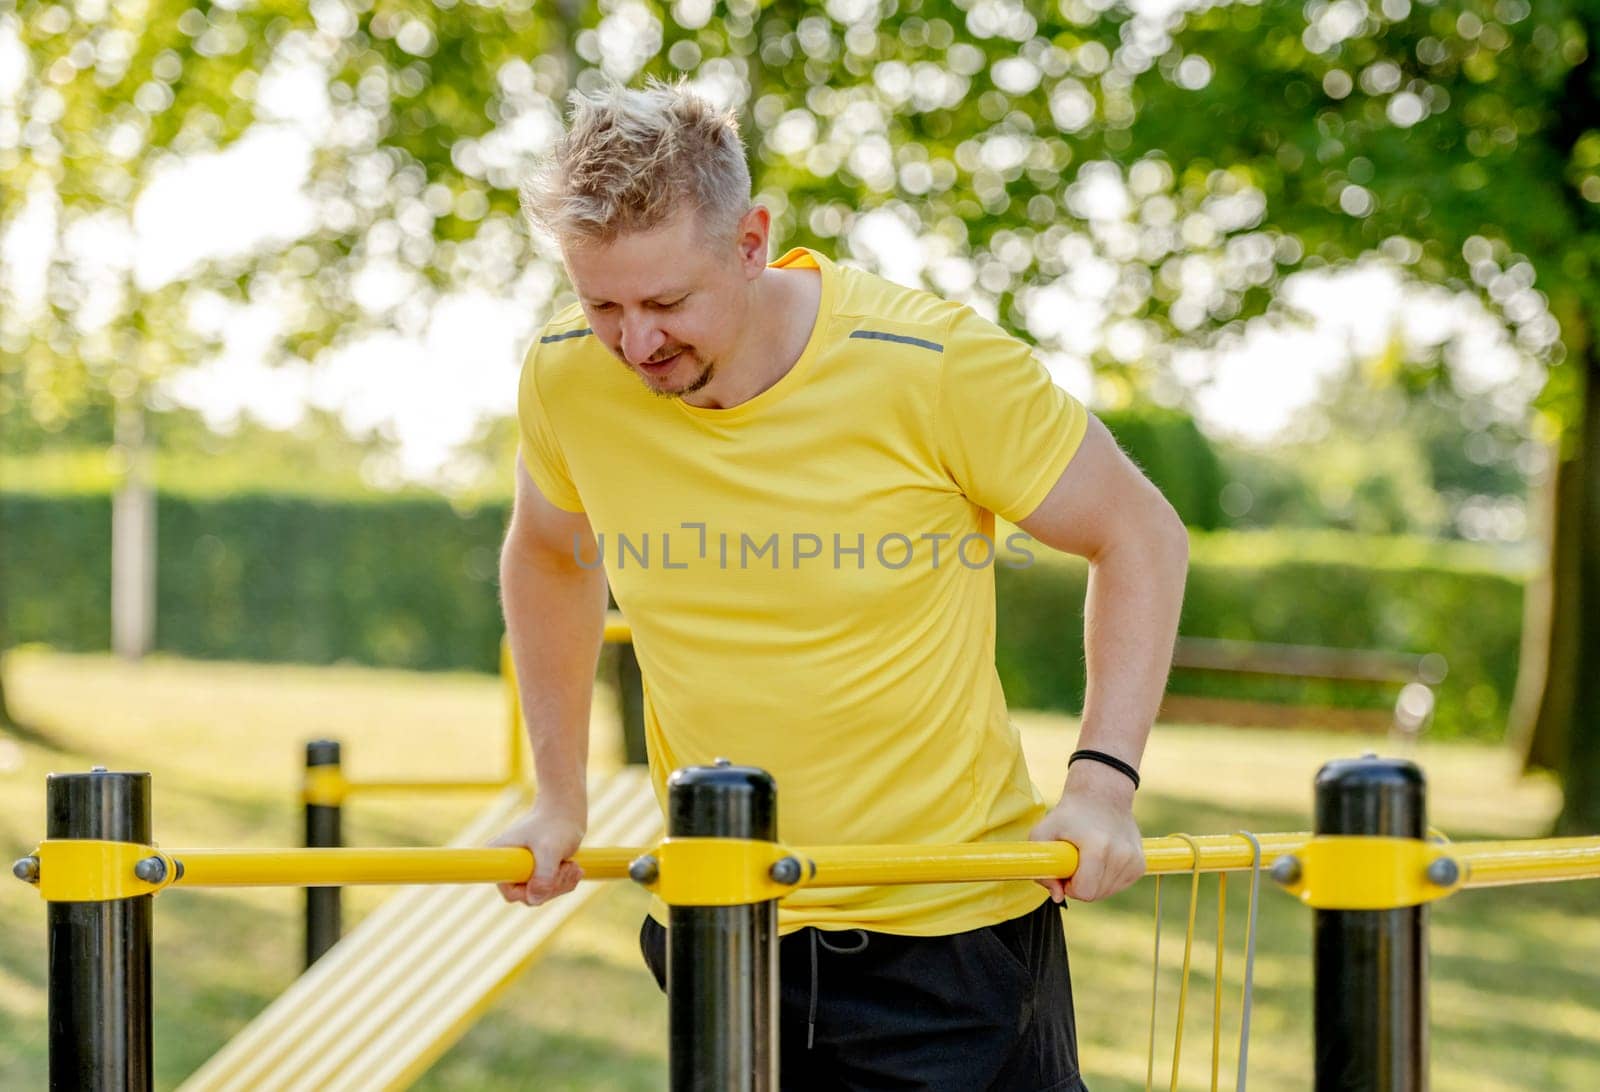 Man excersing with horizontal bar outdoors by tan4ikk1